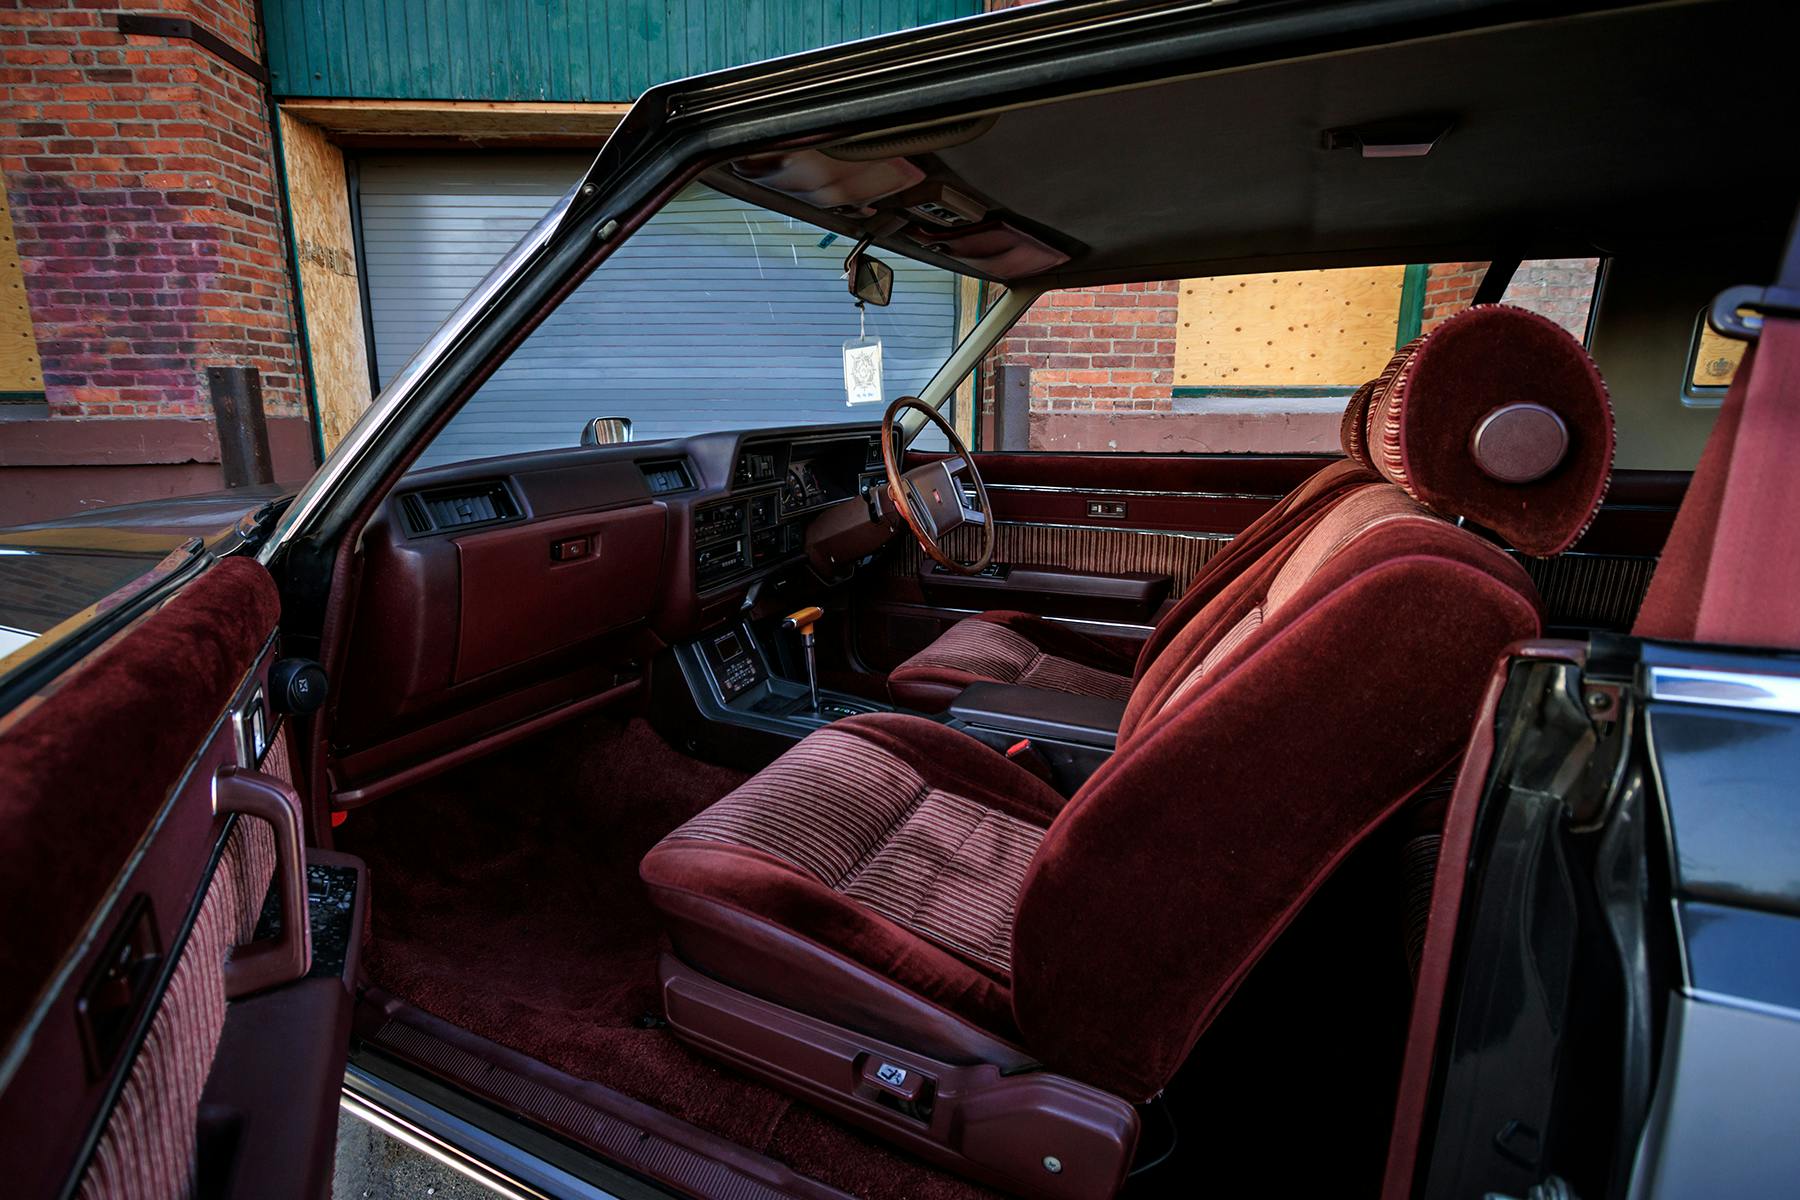 Toyota Crown Coupe interior